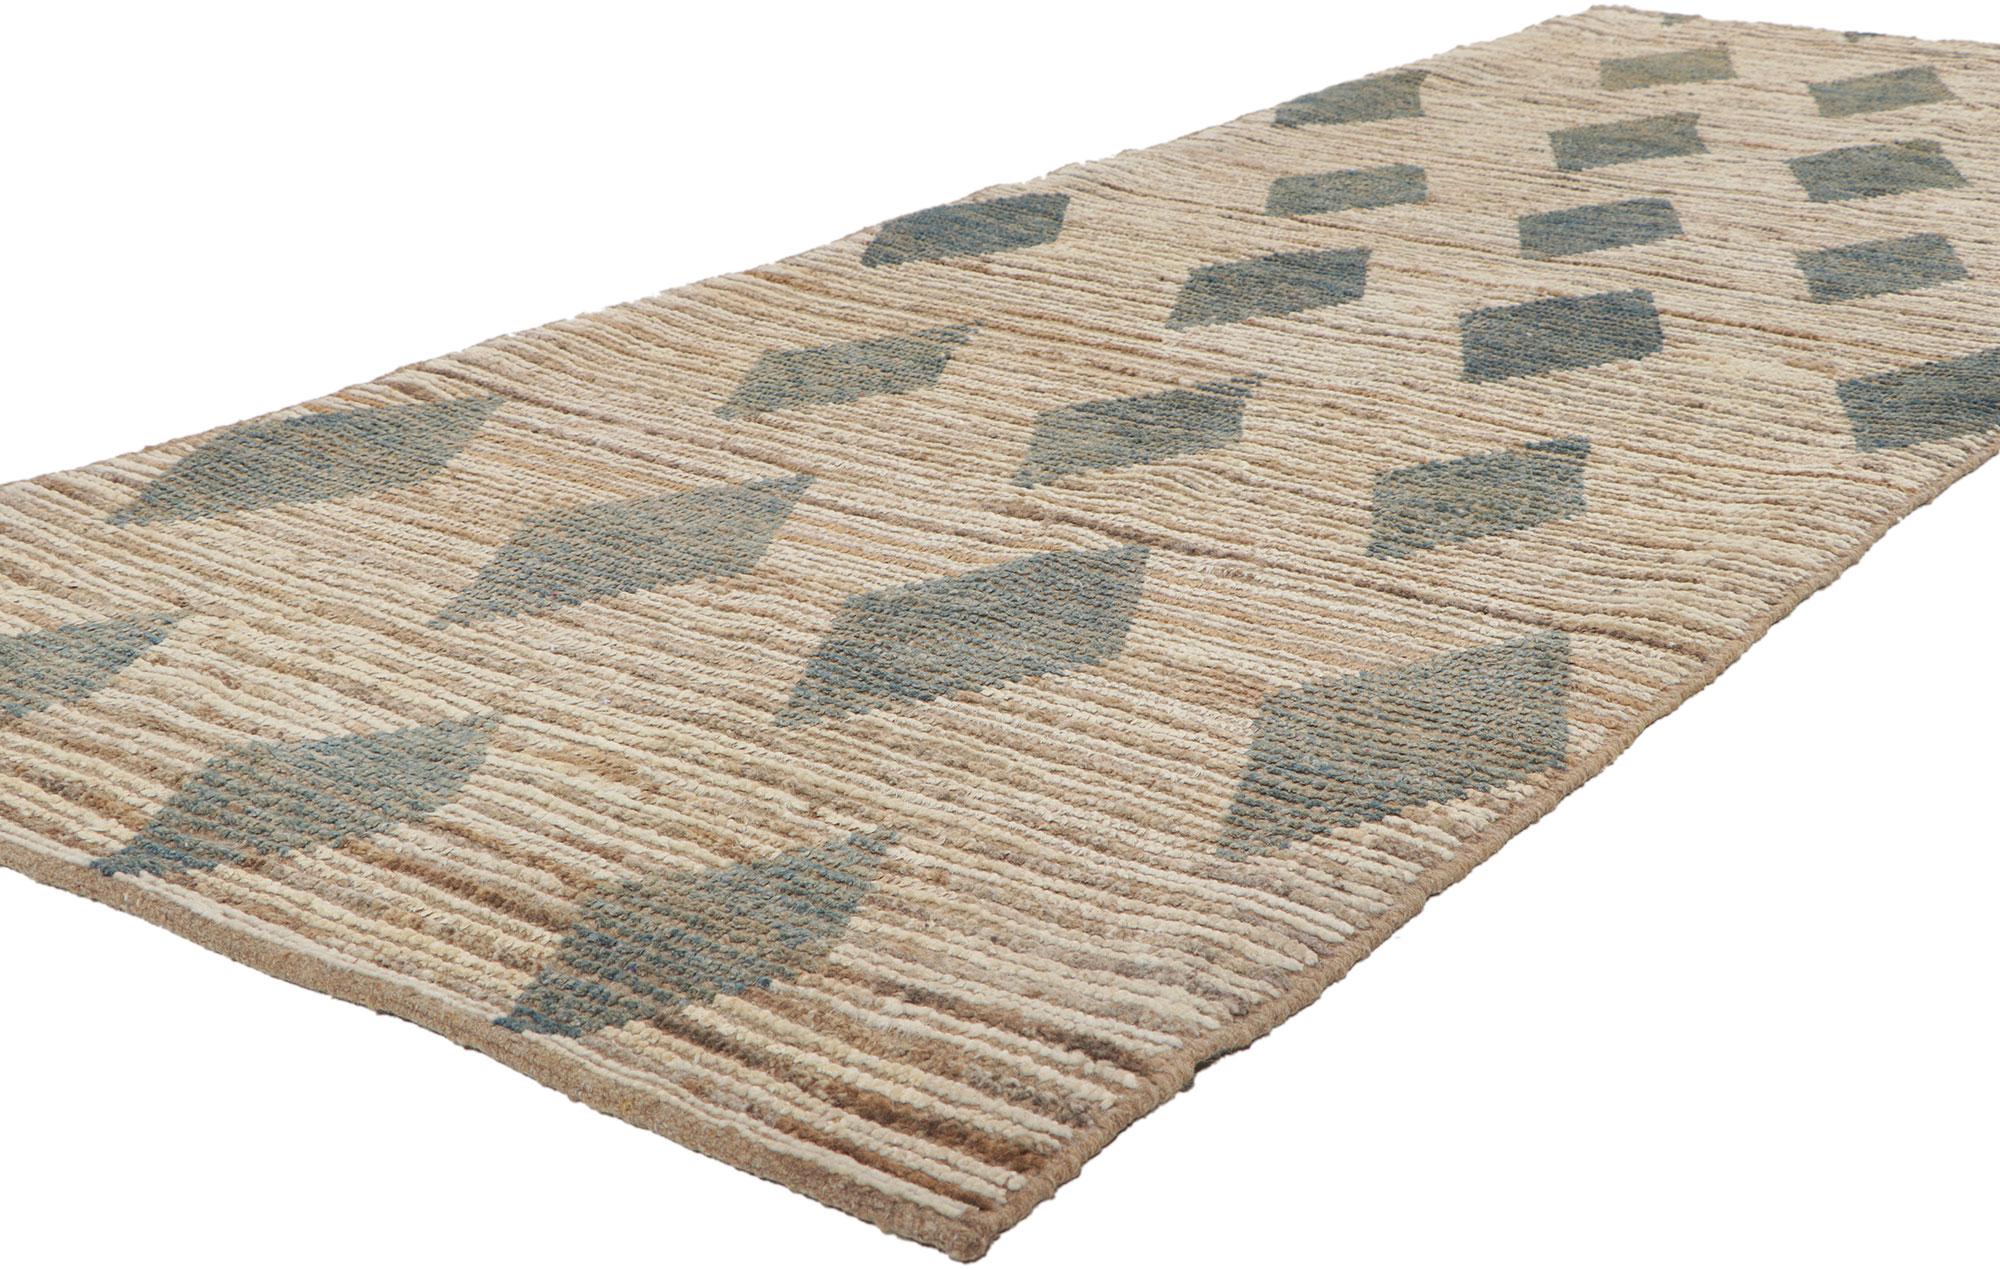 80763 New Contemporary Moroccan runner with Short Pile, 03'04 x 09'00. With its bohemian style, incredible detail and texture, this hand knotted wool contemporary Moroccan runner is a captivating vision of woven beauty. The diamond pattern and